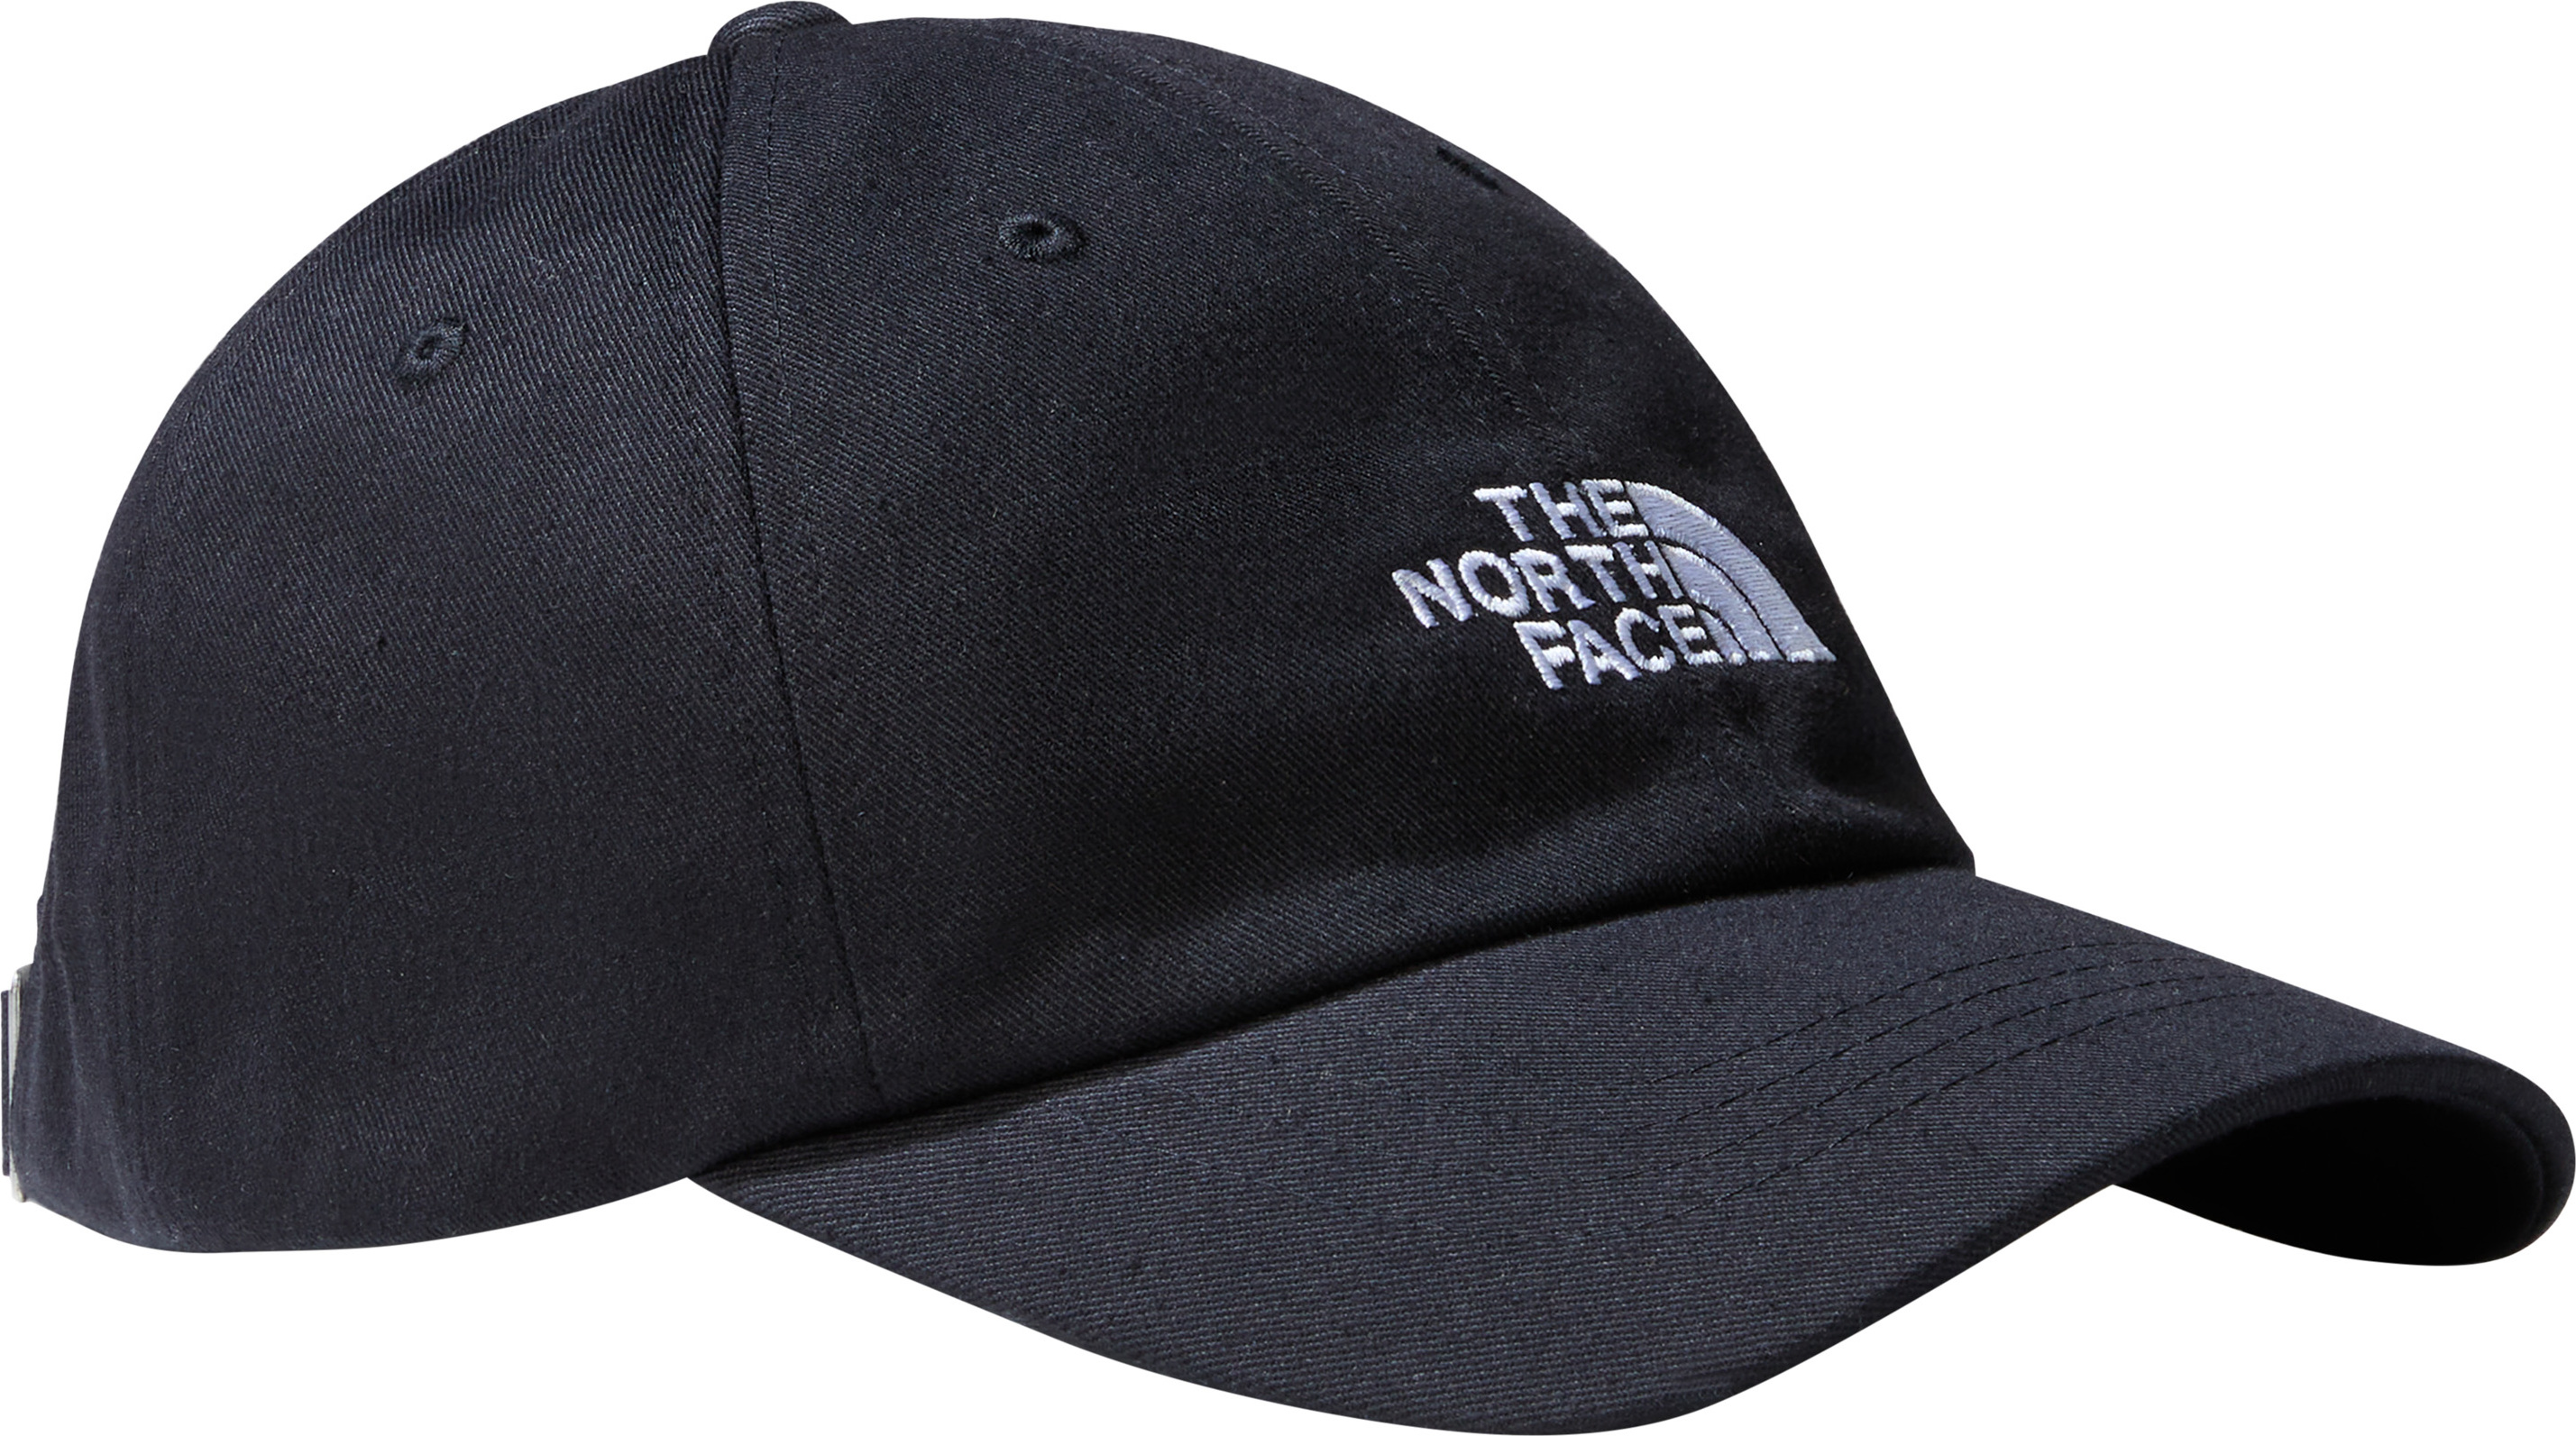 The North Face x CDG NORM HAT Free size ザノースフェイス